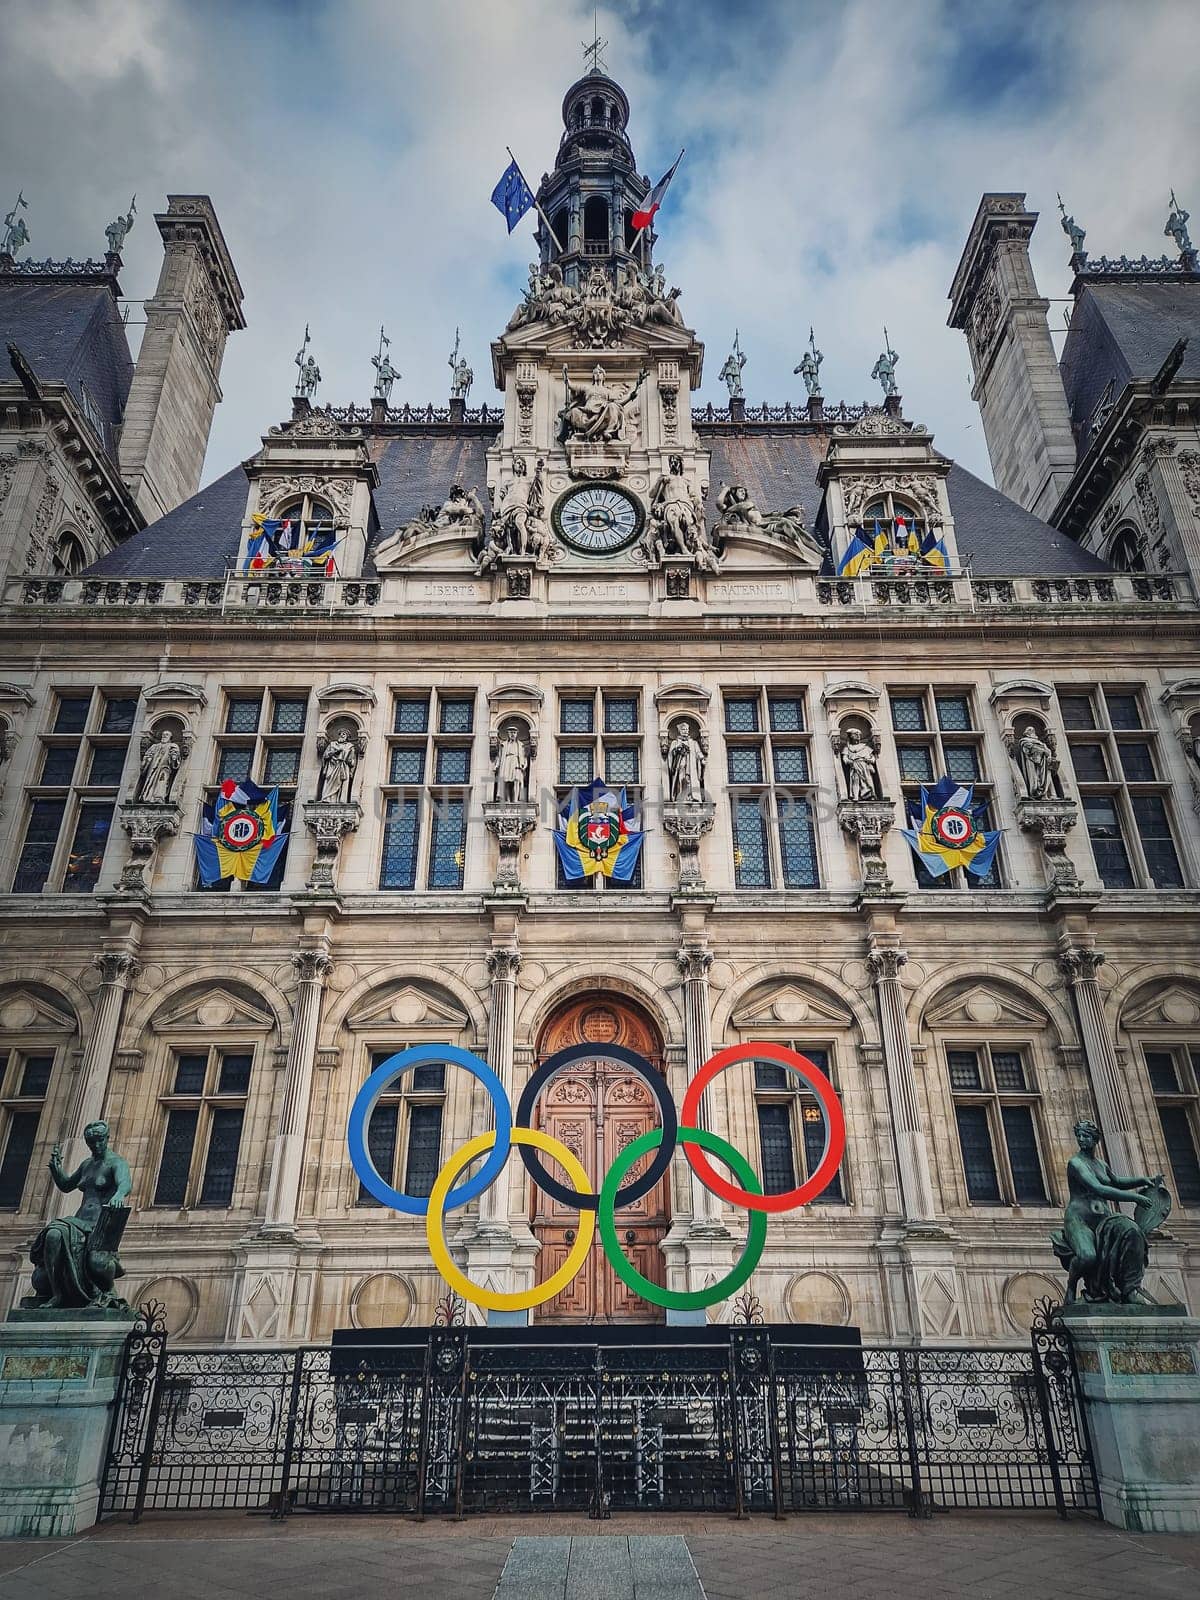 Close up Paris City Hall entrance. Outdoors view to the beautiful ornate facade of the historical building and the olympic games rings symbol in front of the central doors, as France host in 2024